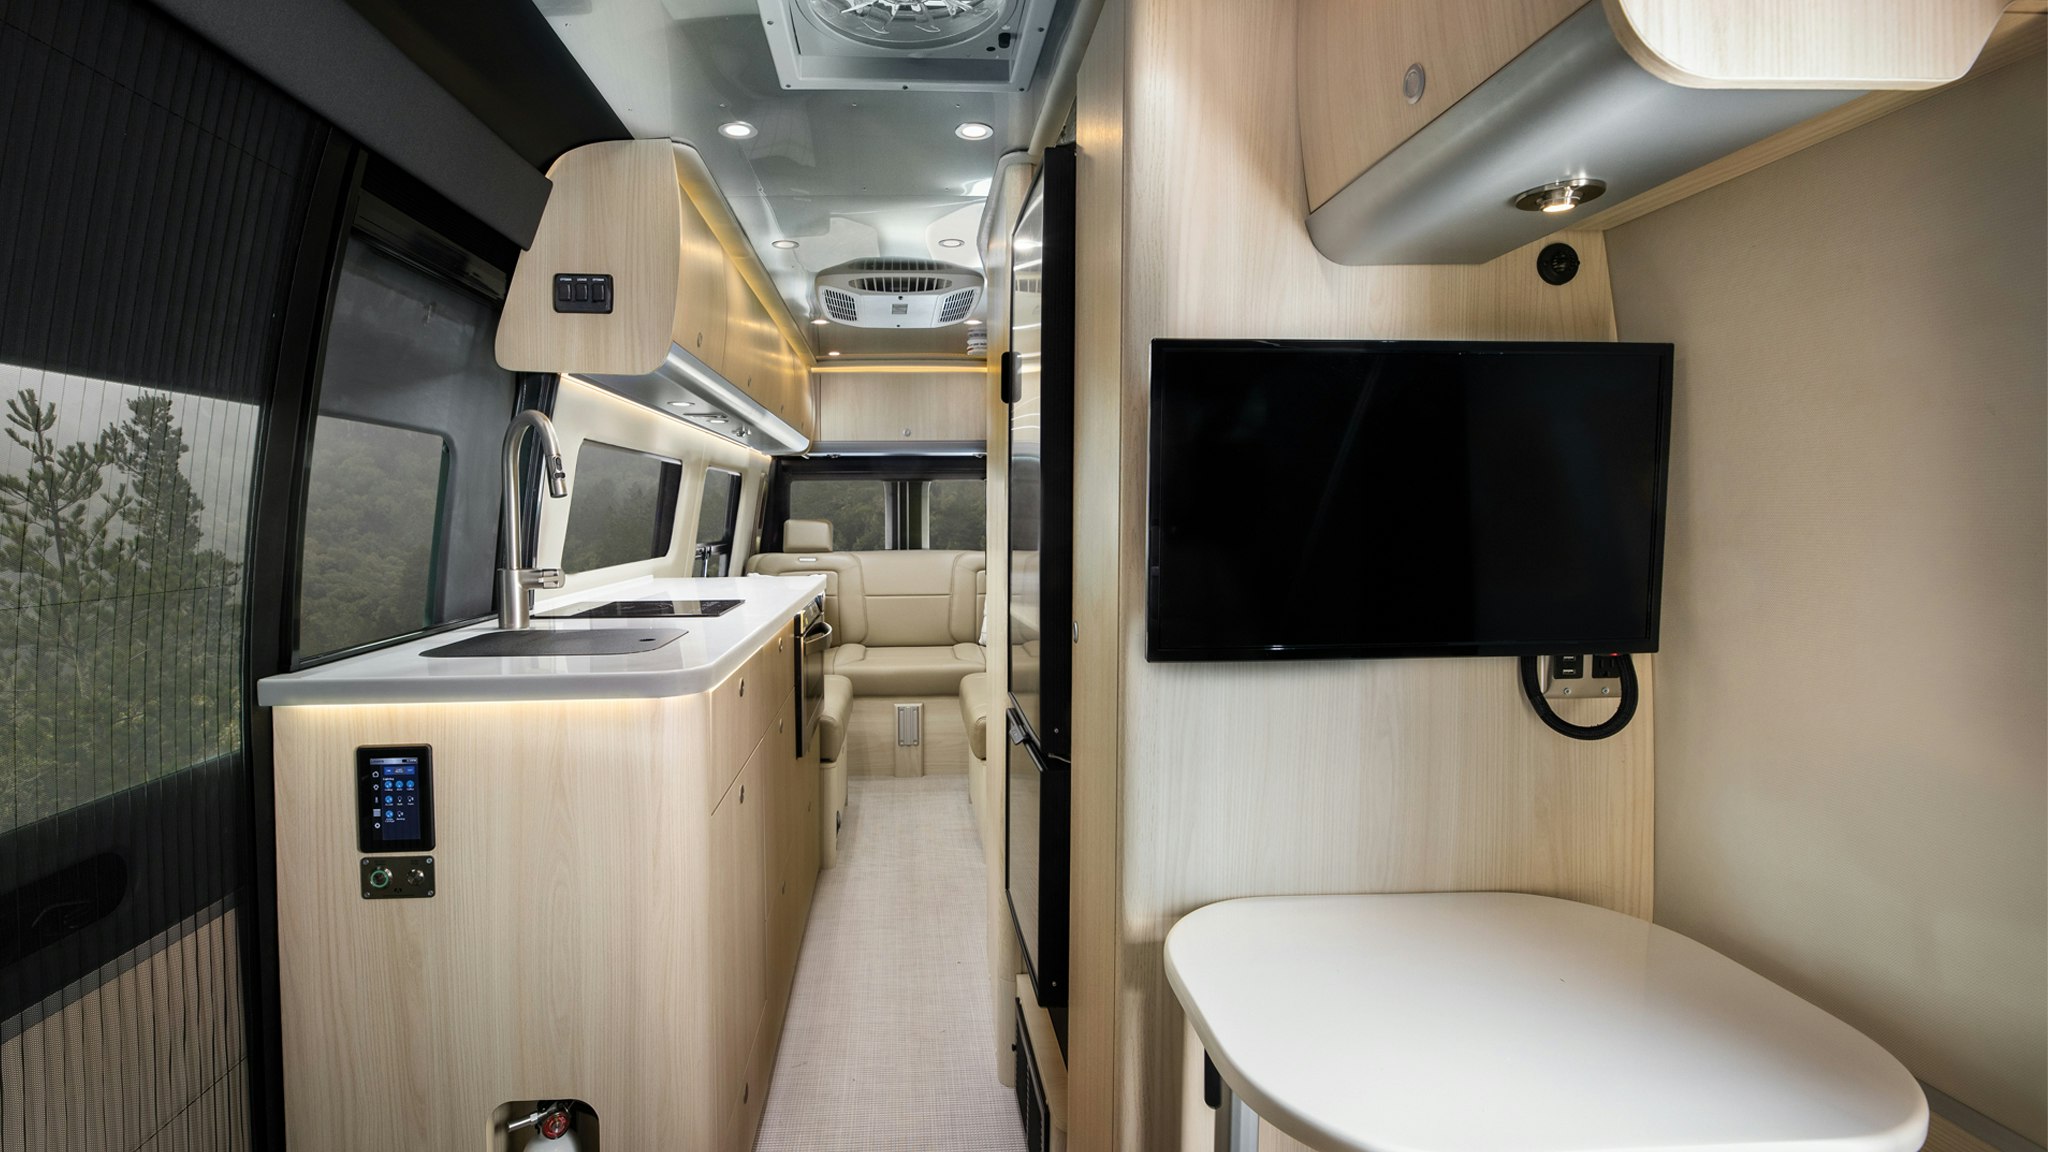 The Airstream Interstate 24GL Touring Coach with Classic Canyon interior from the front to the back of the class b motorhome